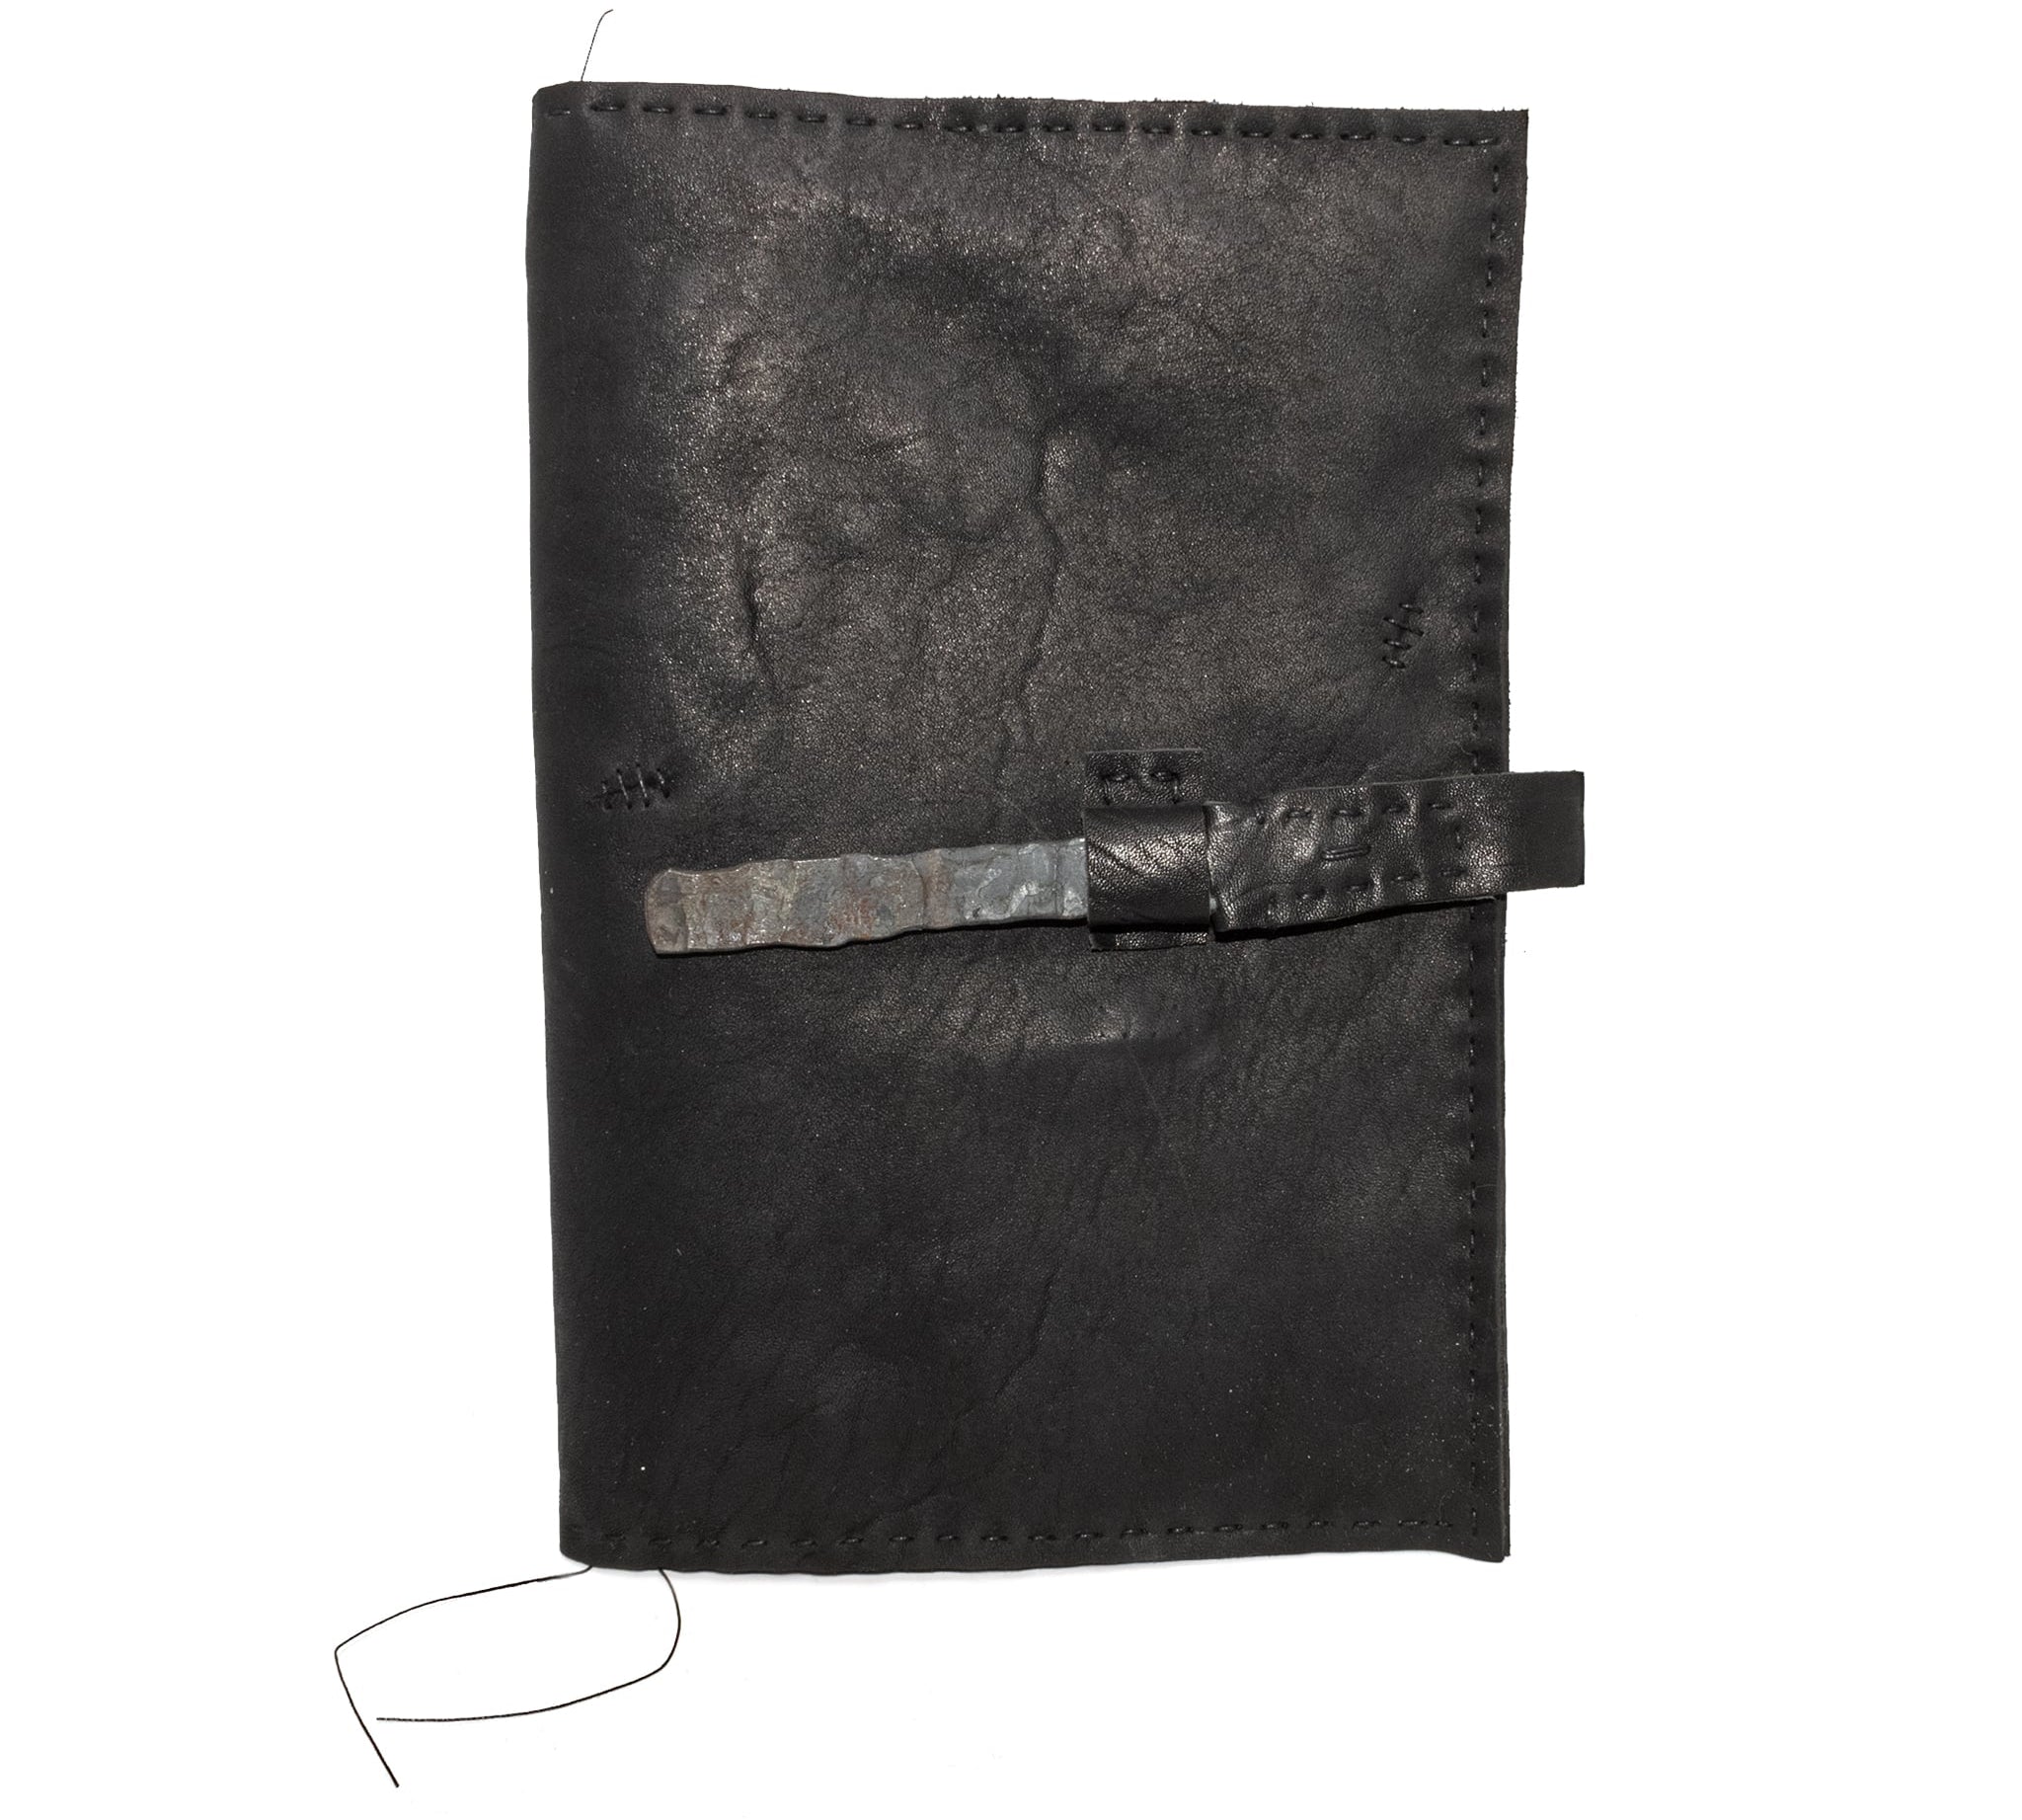 Hand sewn horse leather journal covers available online at atelier skn.